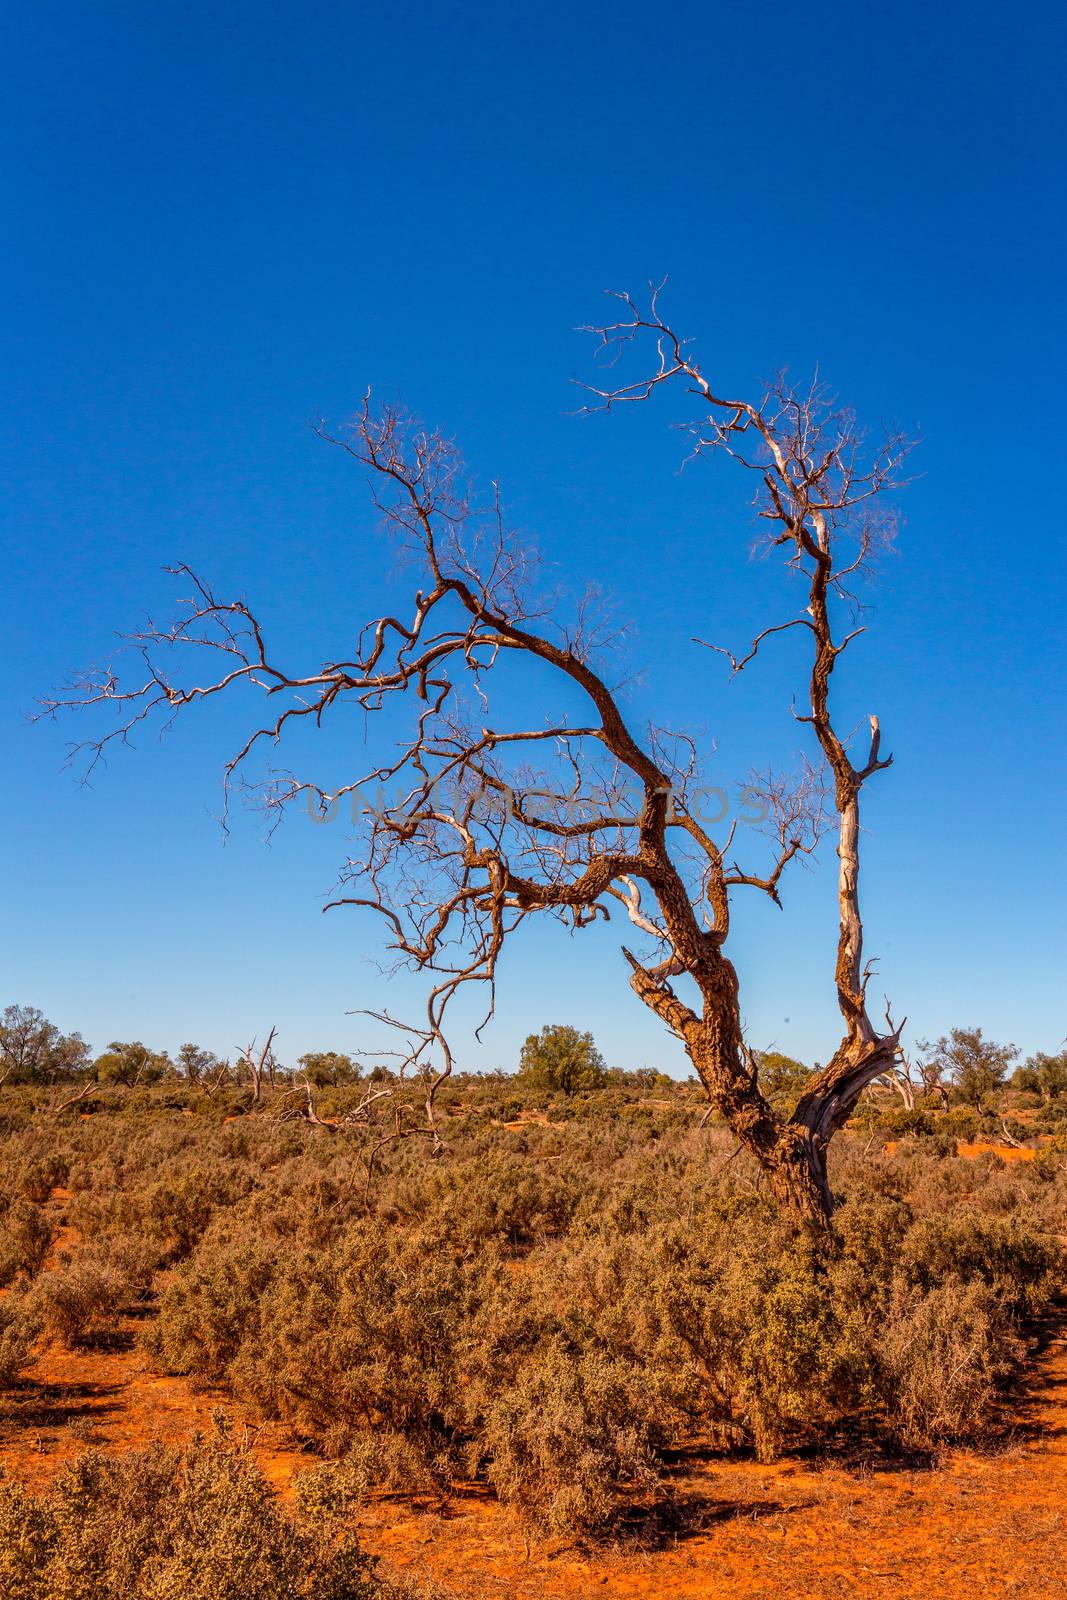 Gnarly old dead tree with twisted branches stands among the saltbush in the dusty red soils of the desert, even the saltbush is covered in a fine layer of this very fine bulldust.kicked up by passing cars it gets everywhere